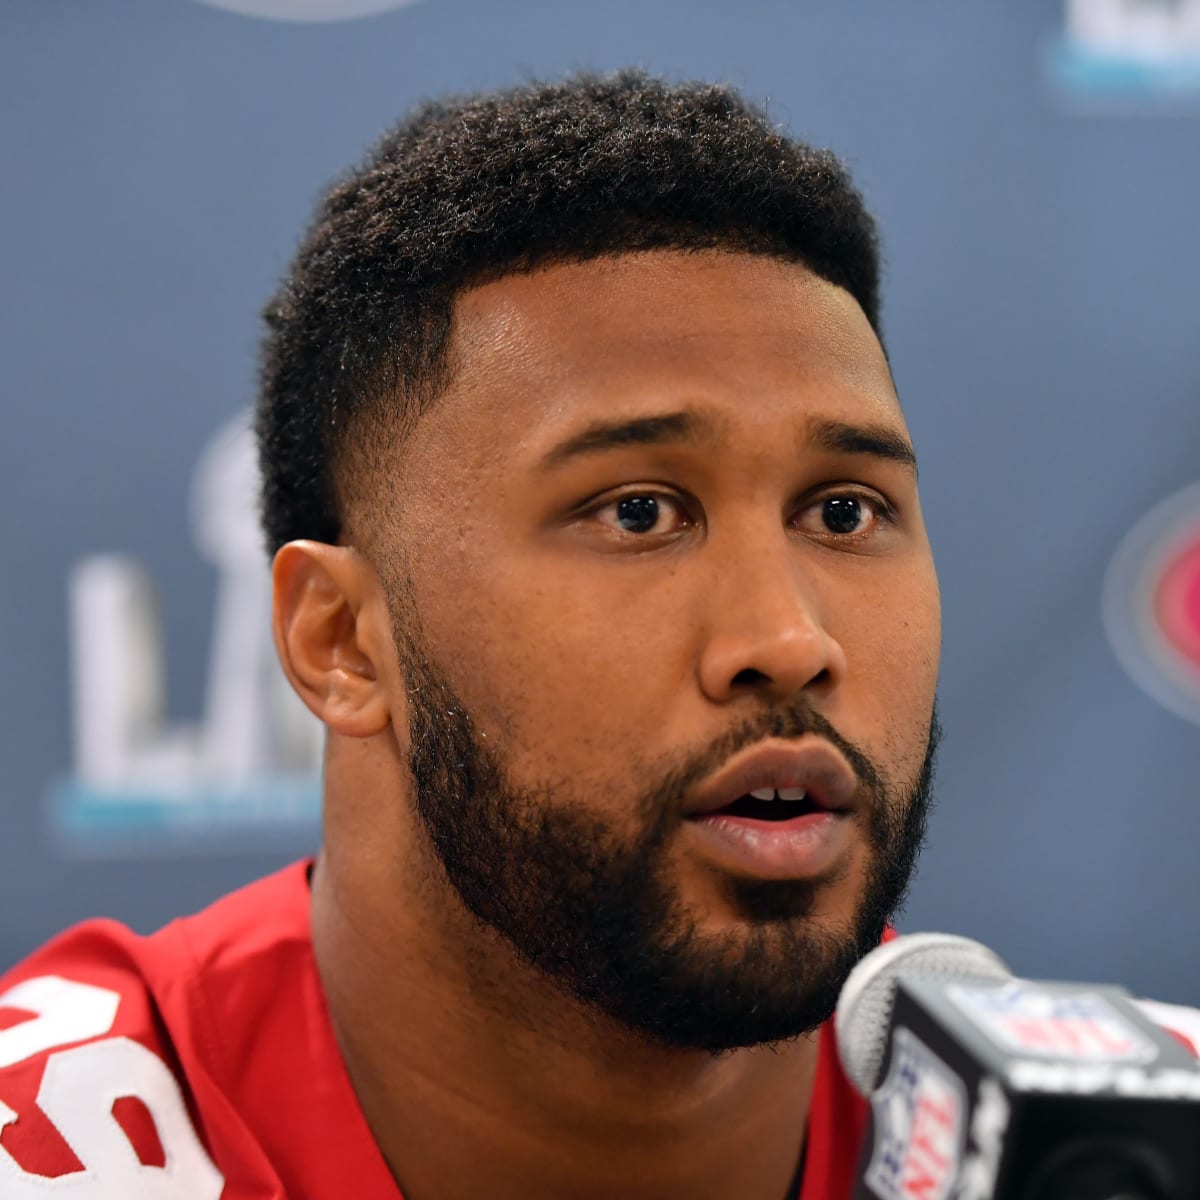 Colts trade 1st-round pick to SF, heavily invest in DT DeForest Buckner